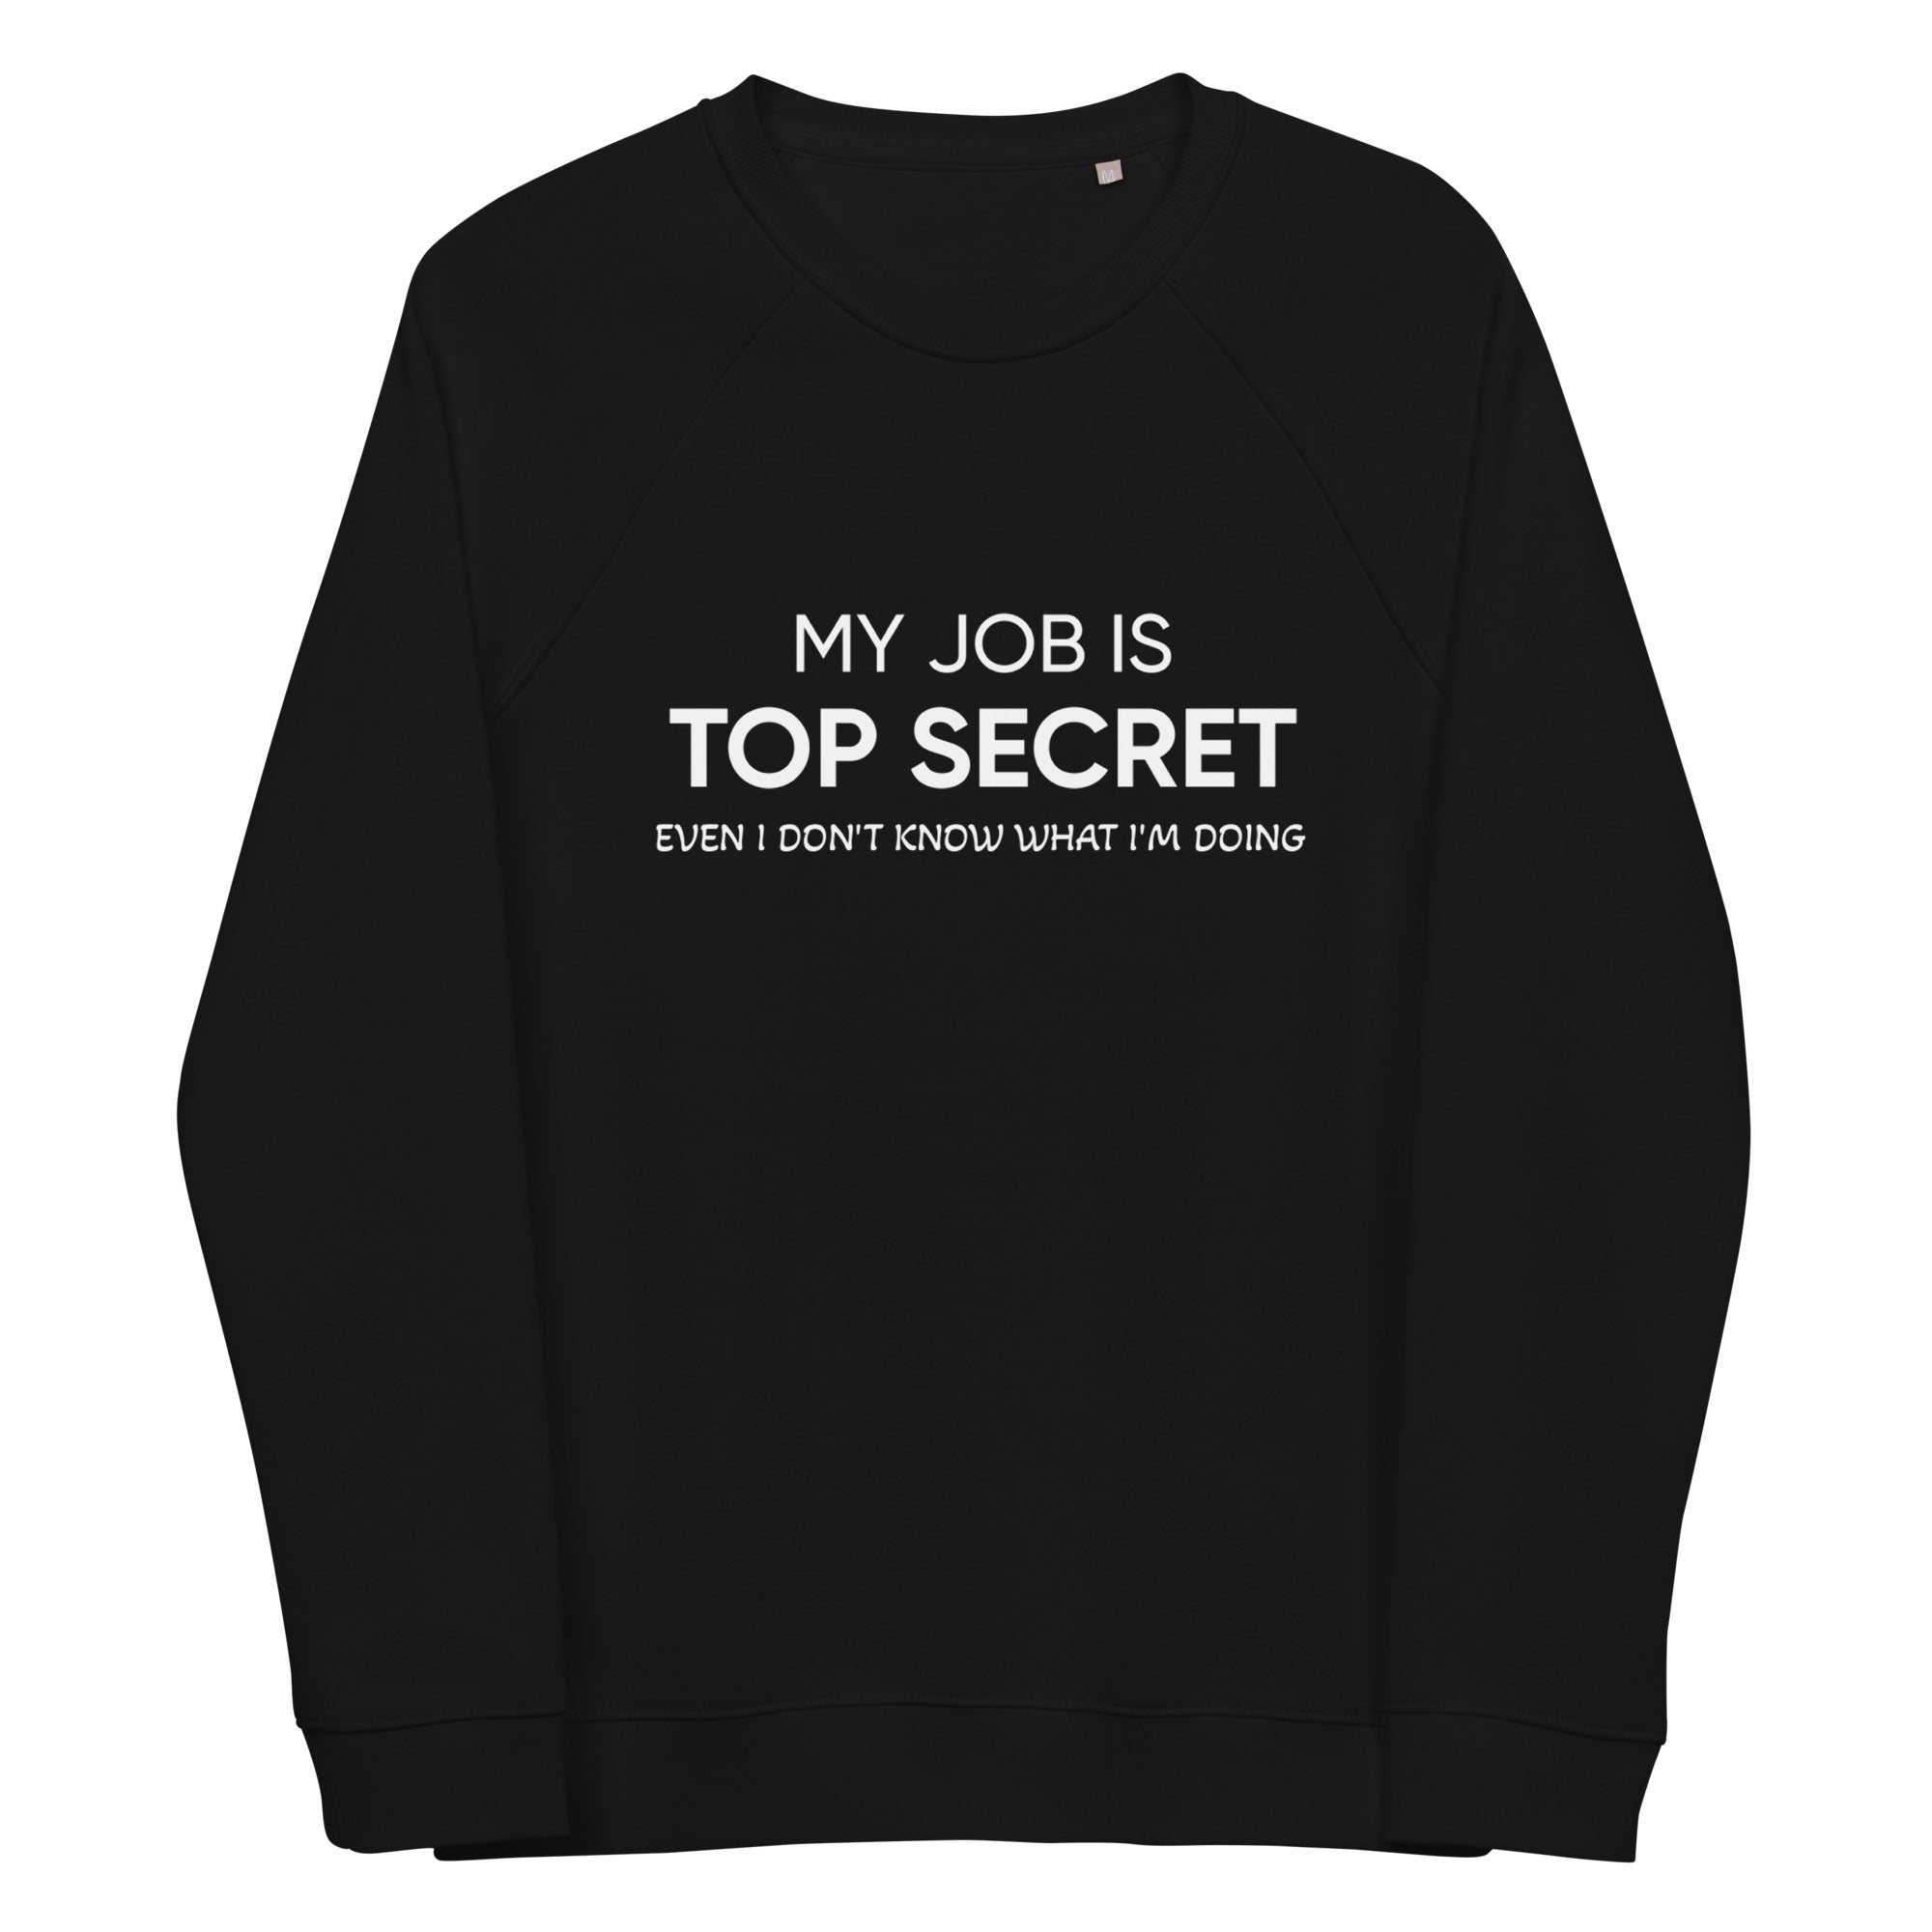 My job is top secret even i don't know what i'm doing - Unisex organic –